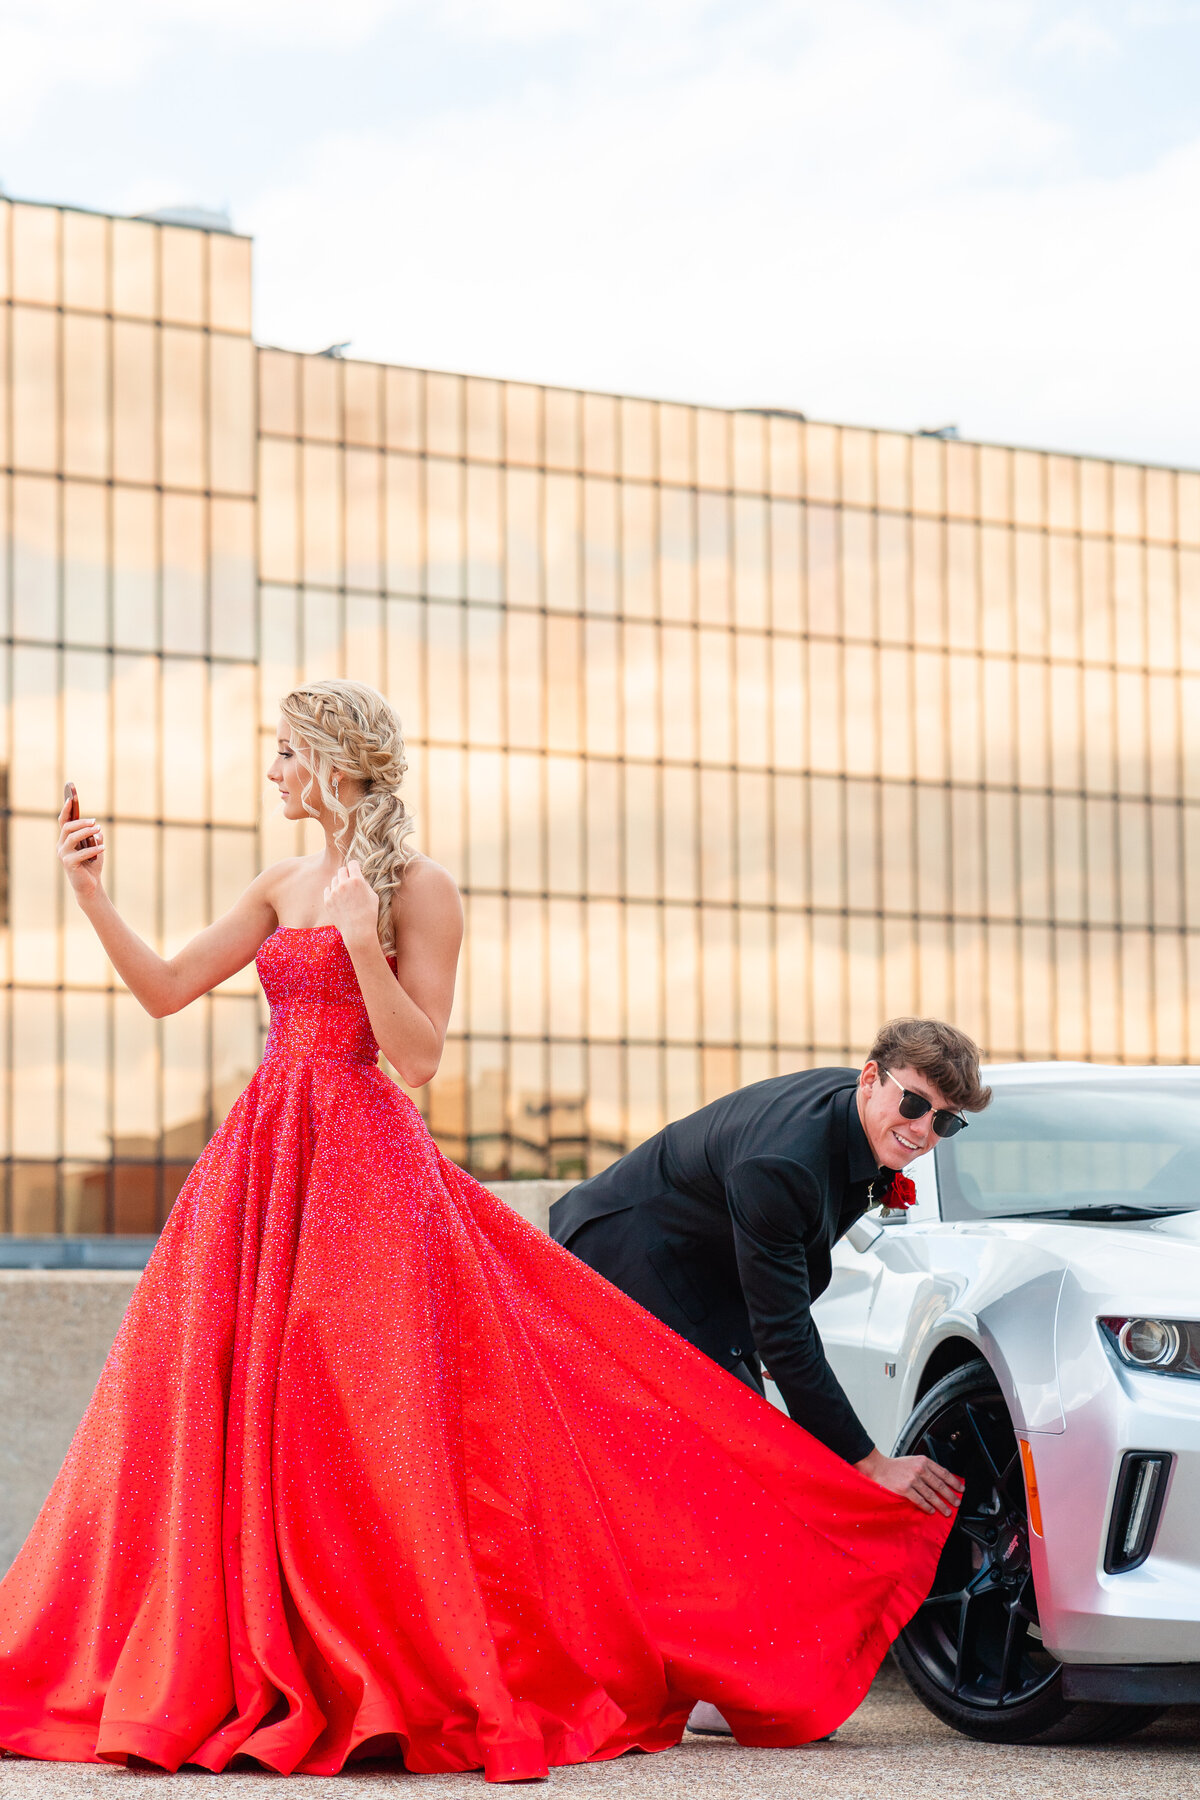 Chattanooga photographer Kelley Hoagland takes prom portraits at West Village Chattanooga, TN location.  Teenagers posed with car.